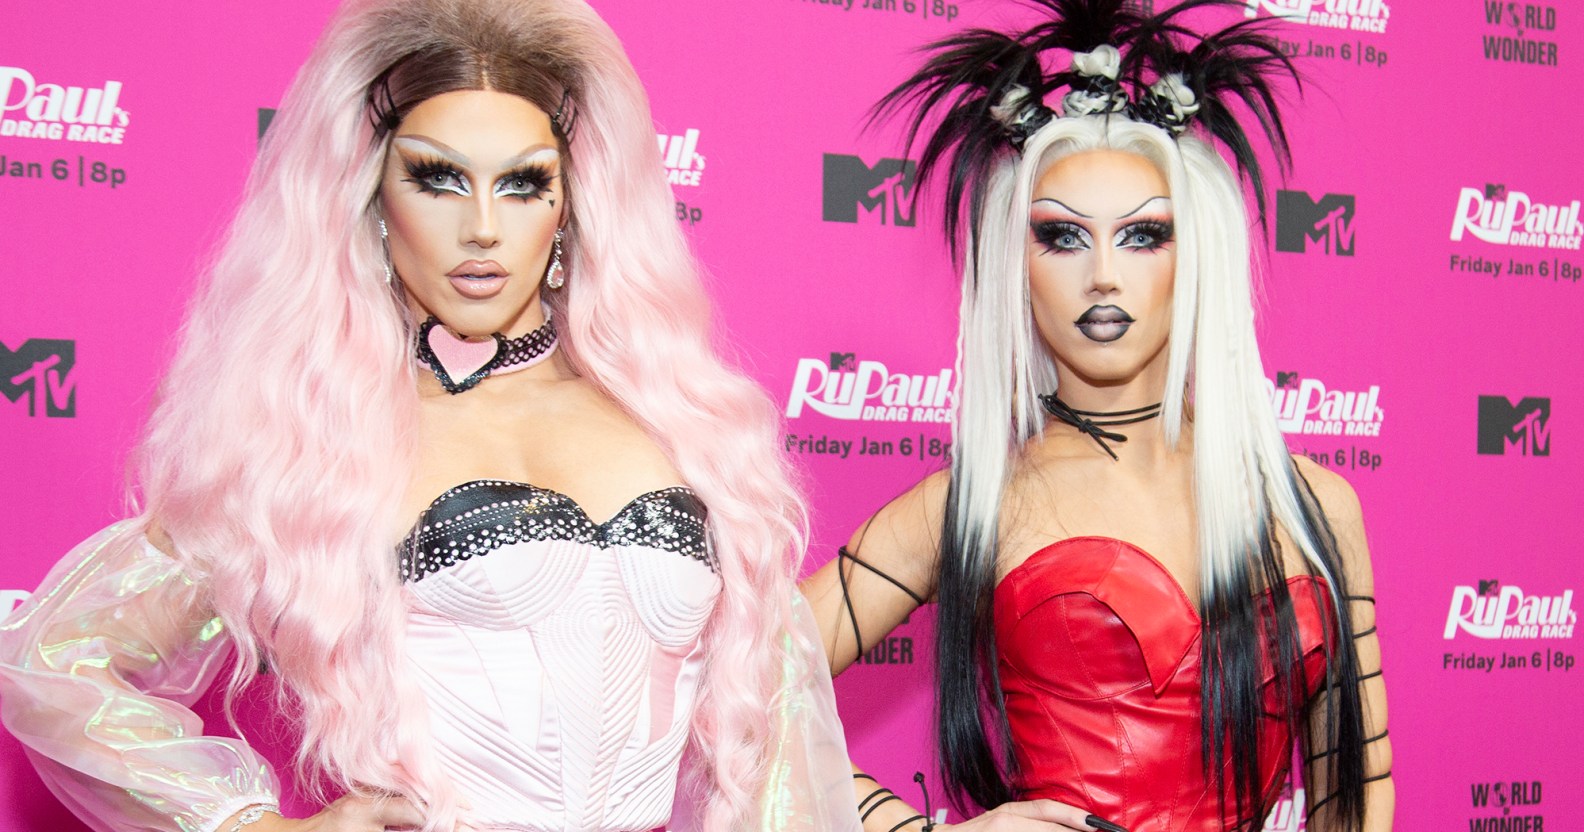 Drag Race season 15 contestants Sugar (left) and Spice against a pink background